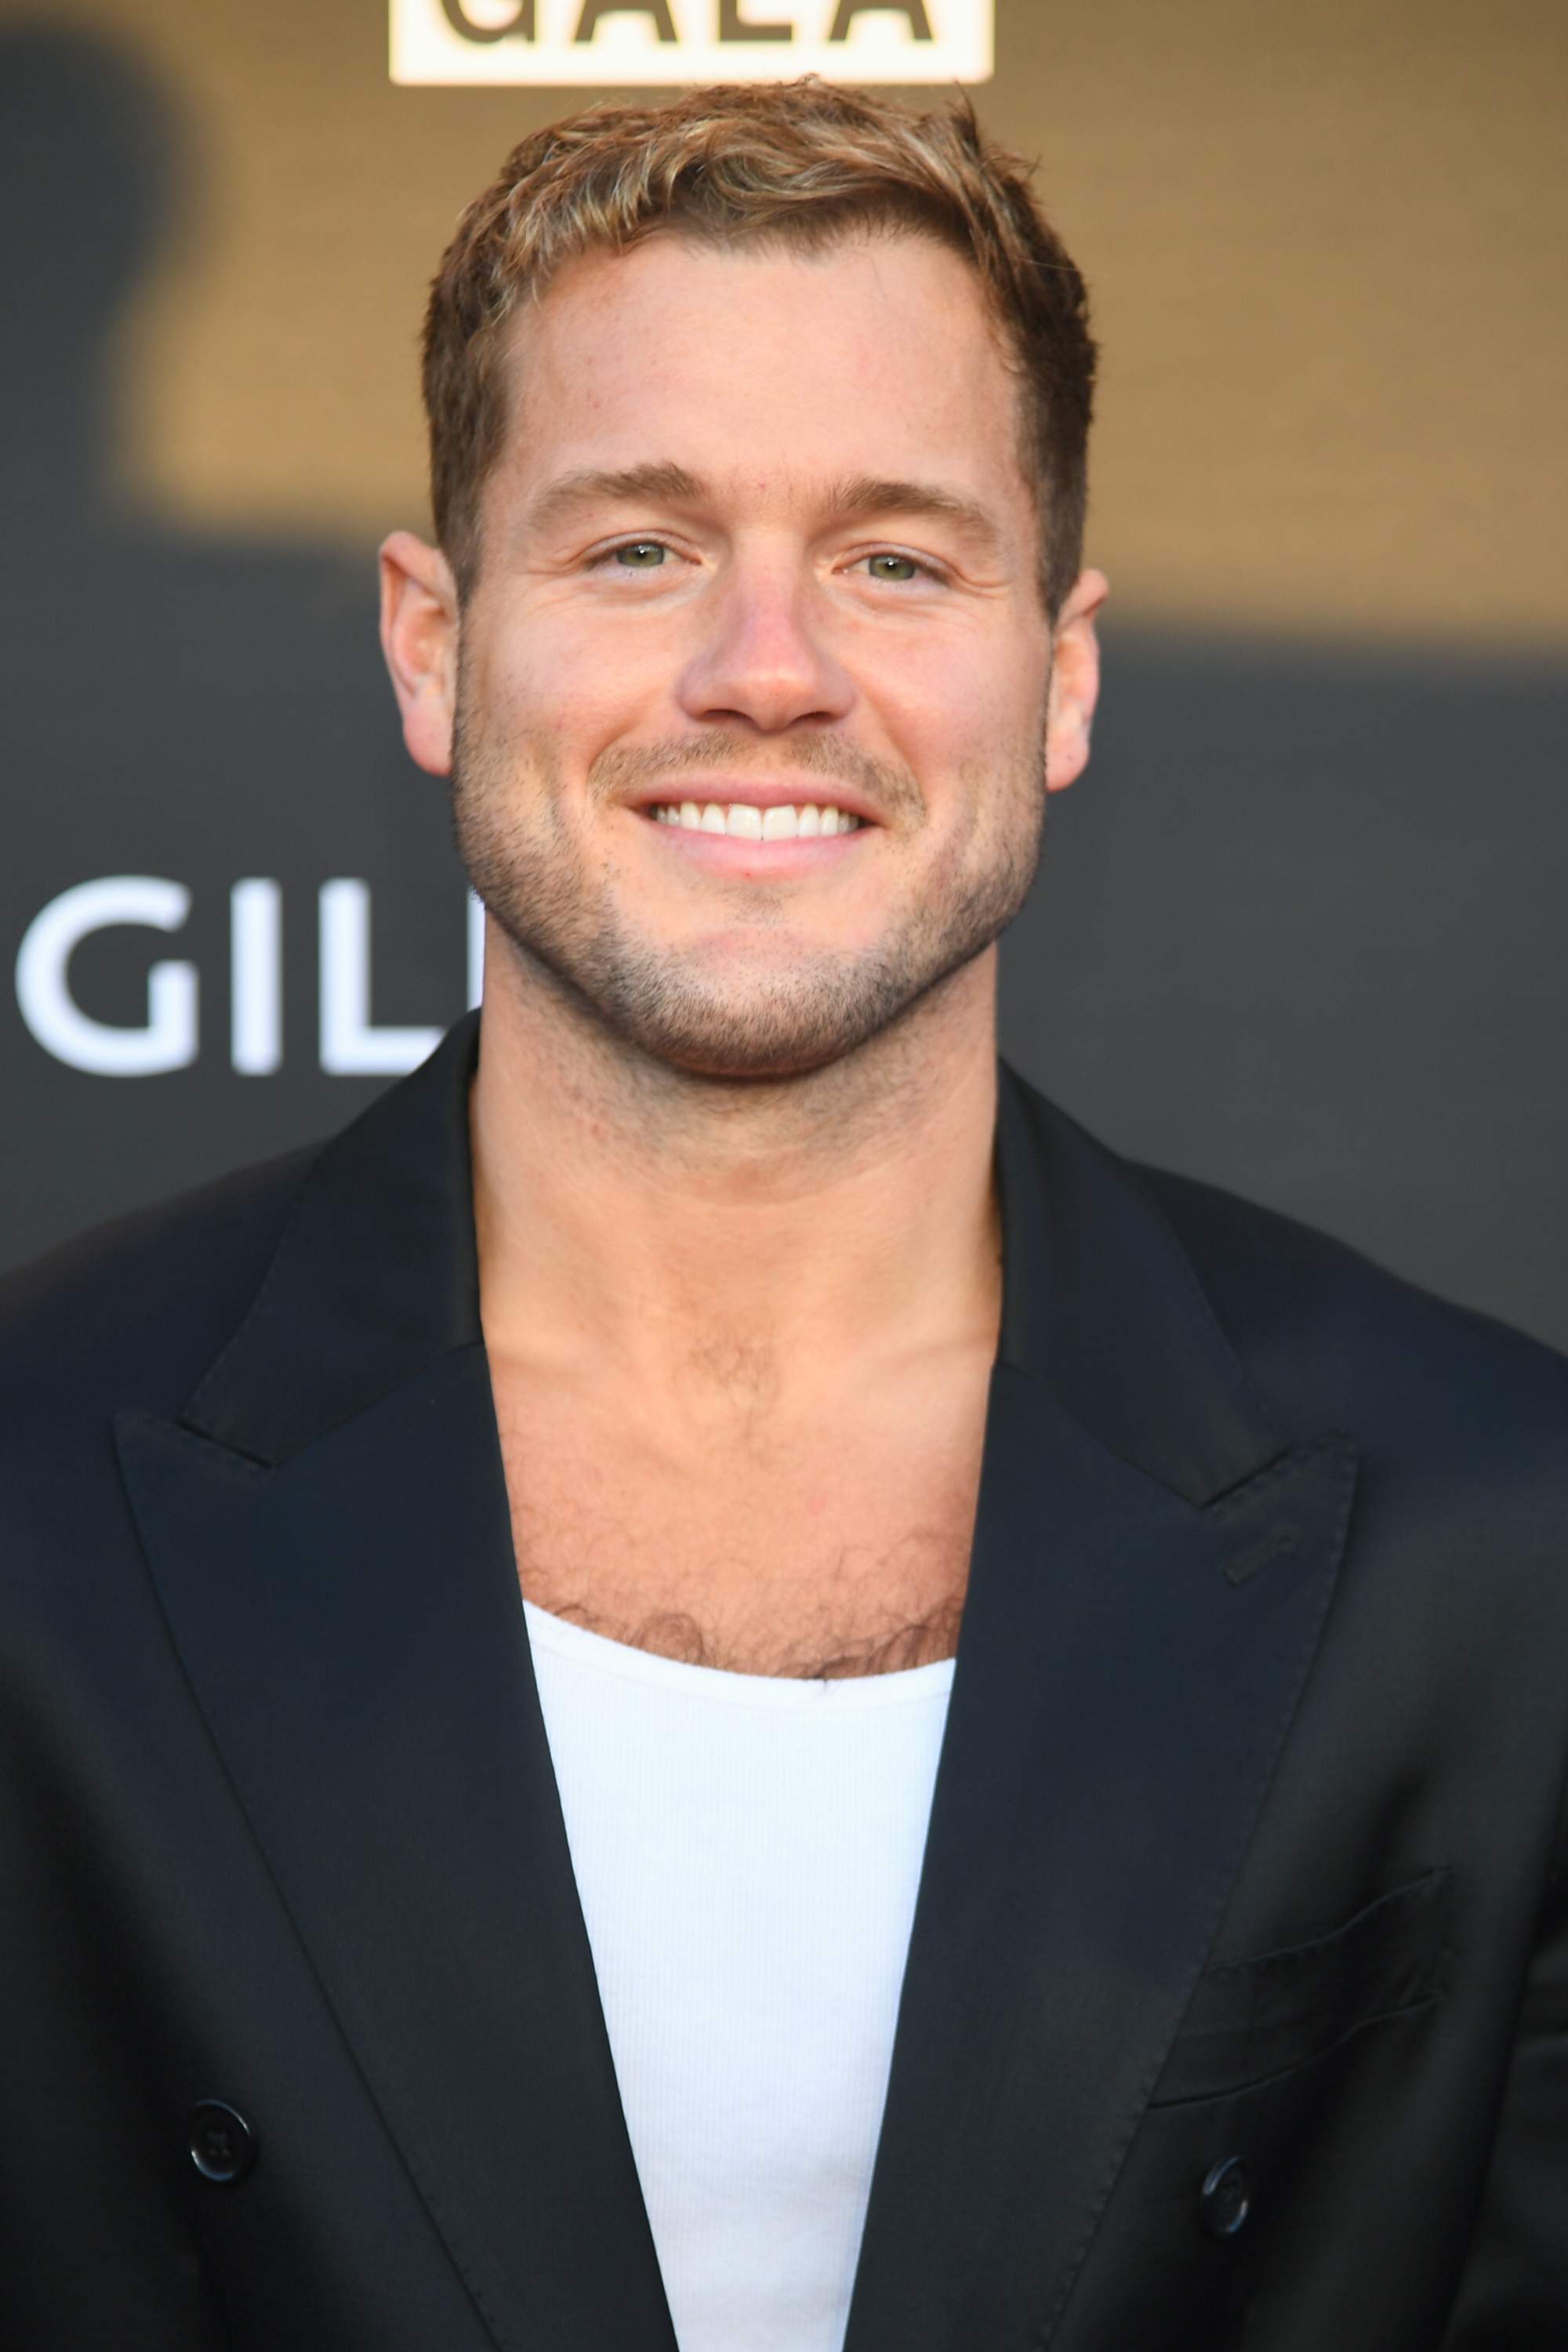 Colton Underwood attended The Los Angeles LGBT Center Gala held at Shrine Auditorium and Expo Hall on May 18, 2024, in Los Angeles, California